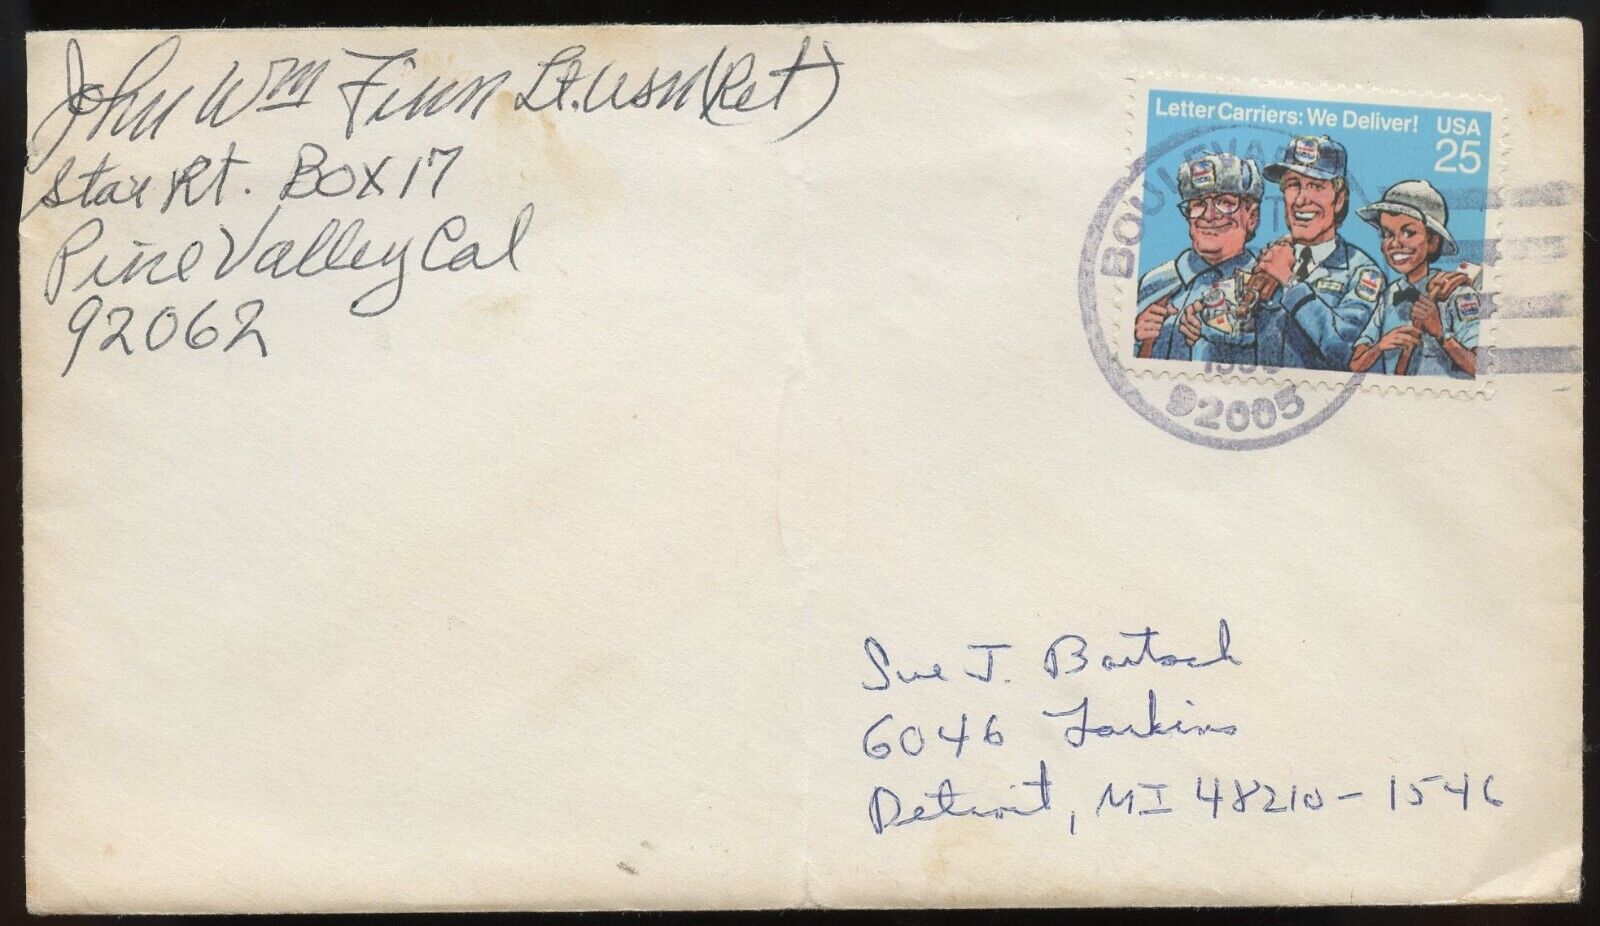 John Finn d2010 signed autograph Postal Cover Medal of Honor Pearl Harbor WWII